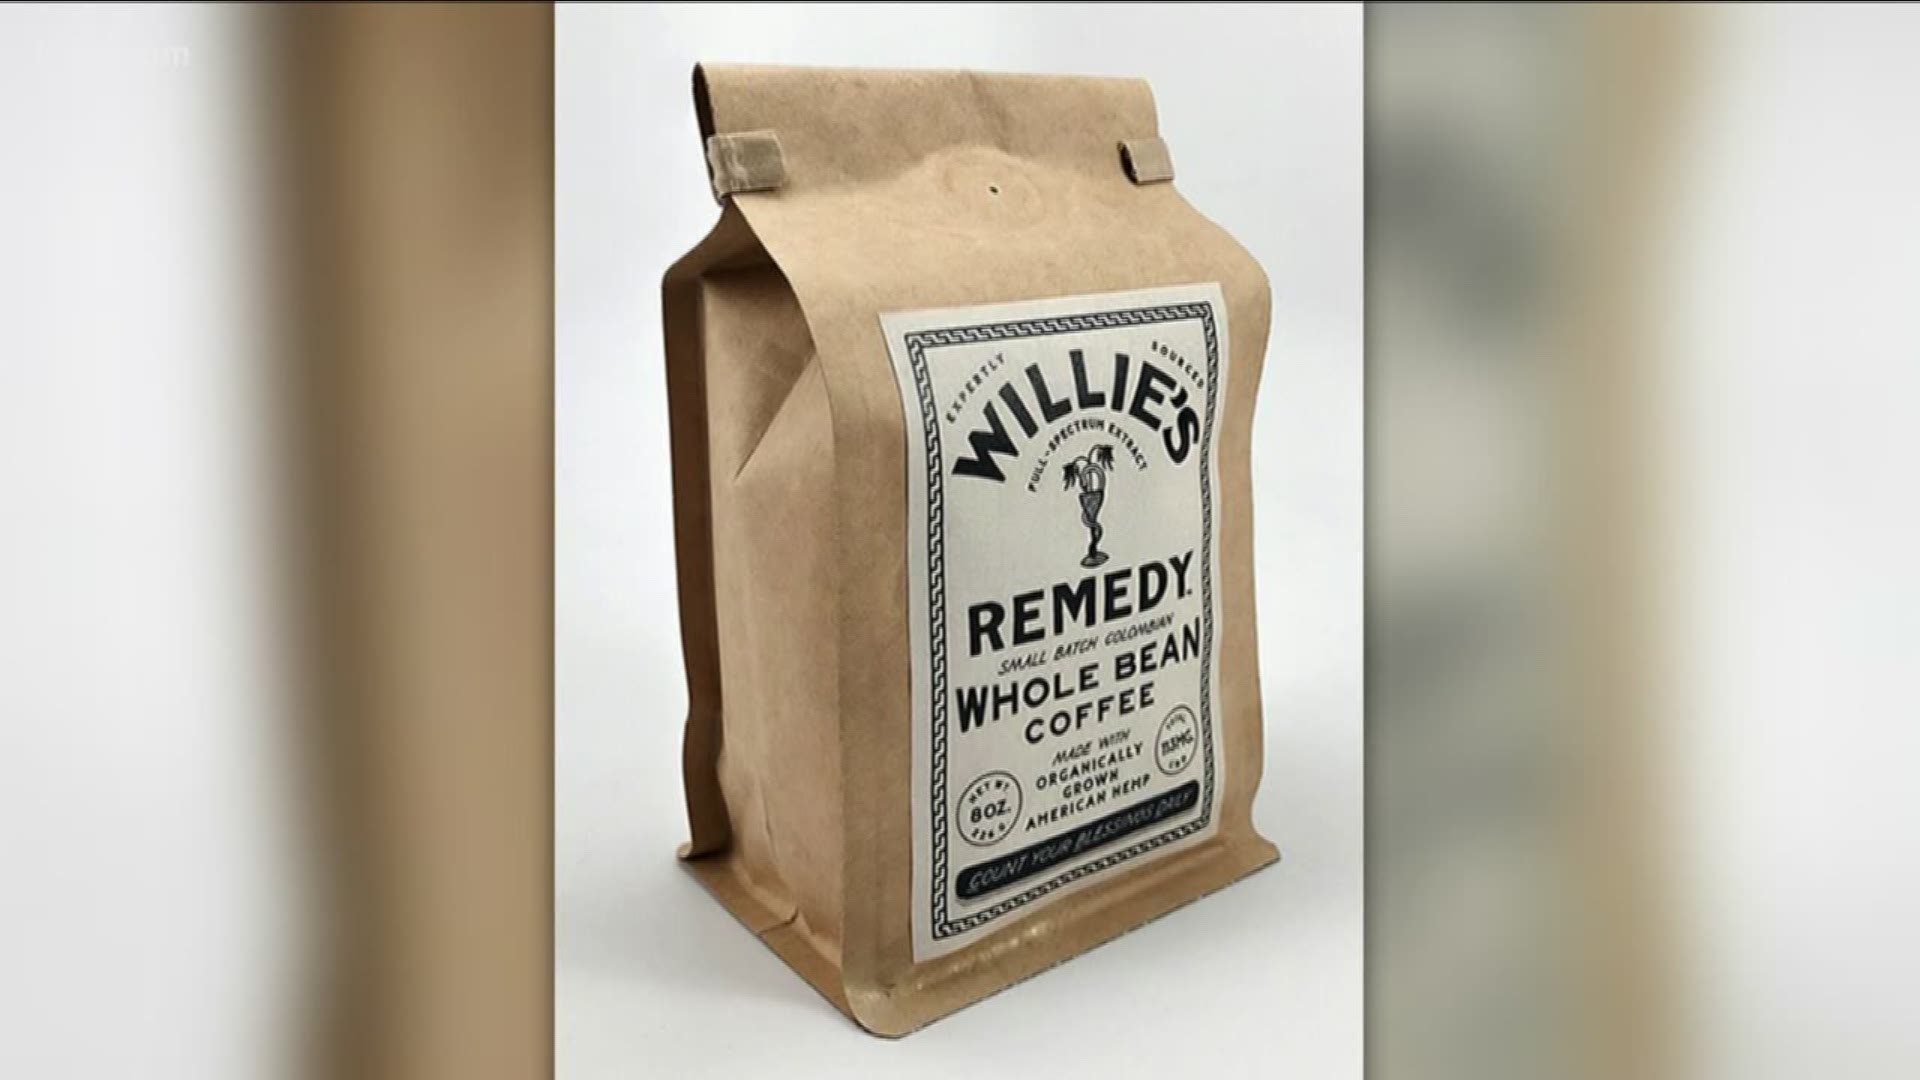 Texas country music legend Willie Nelson and his family debuted a "hemp-infused" product line, Willie's Remedy.